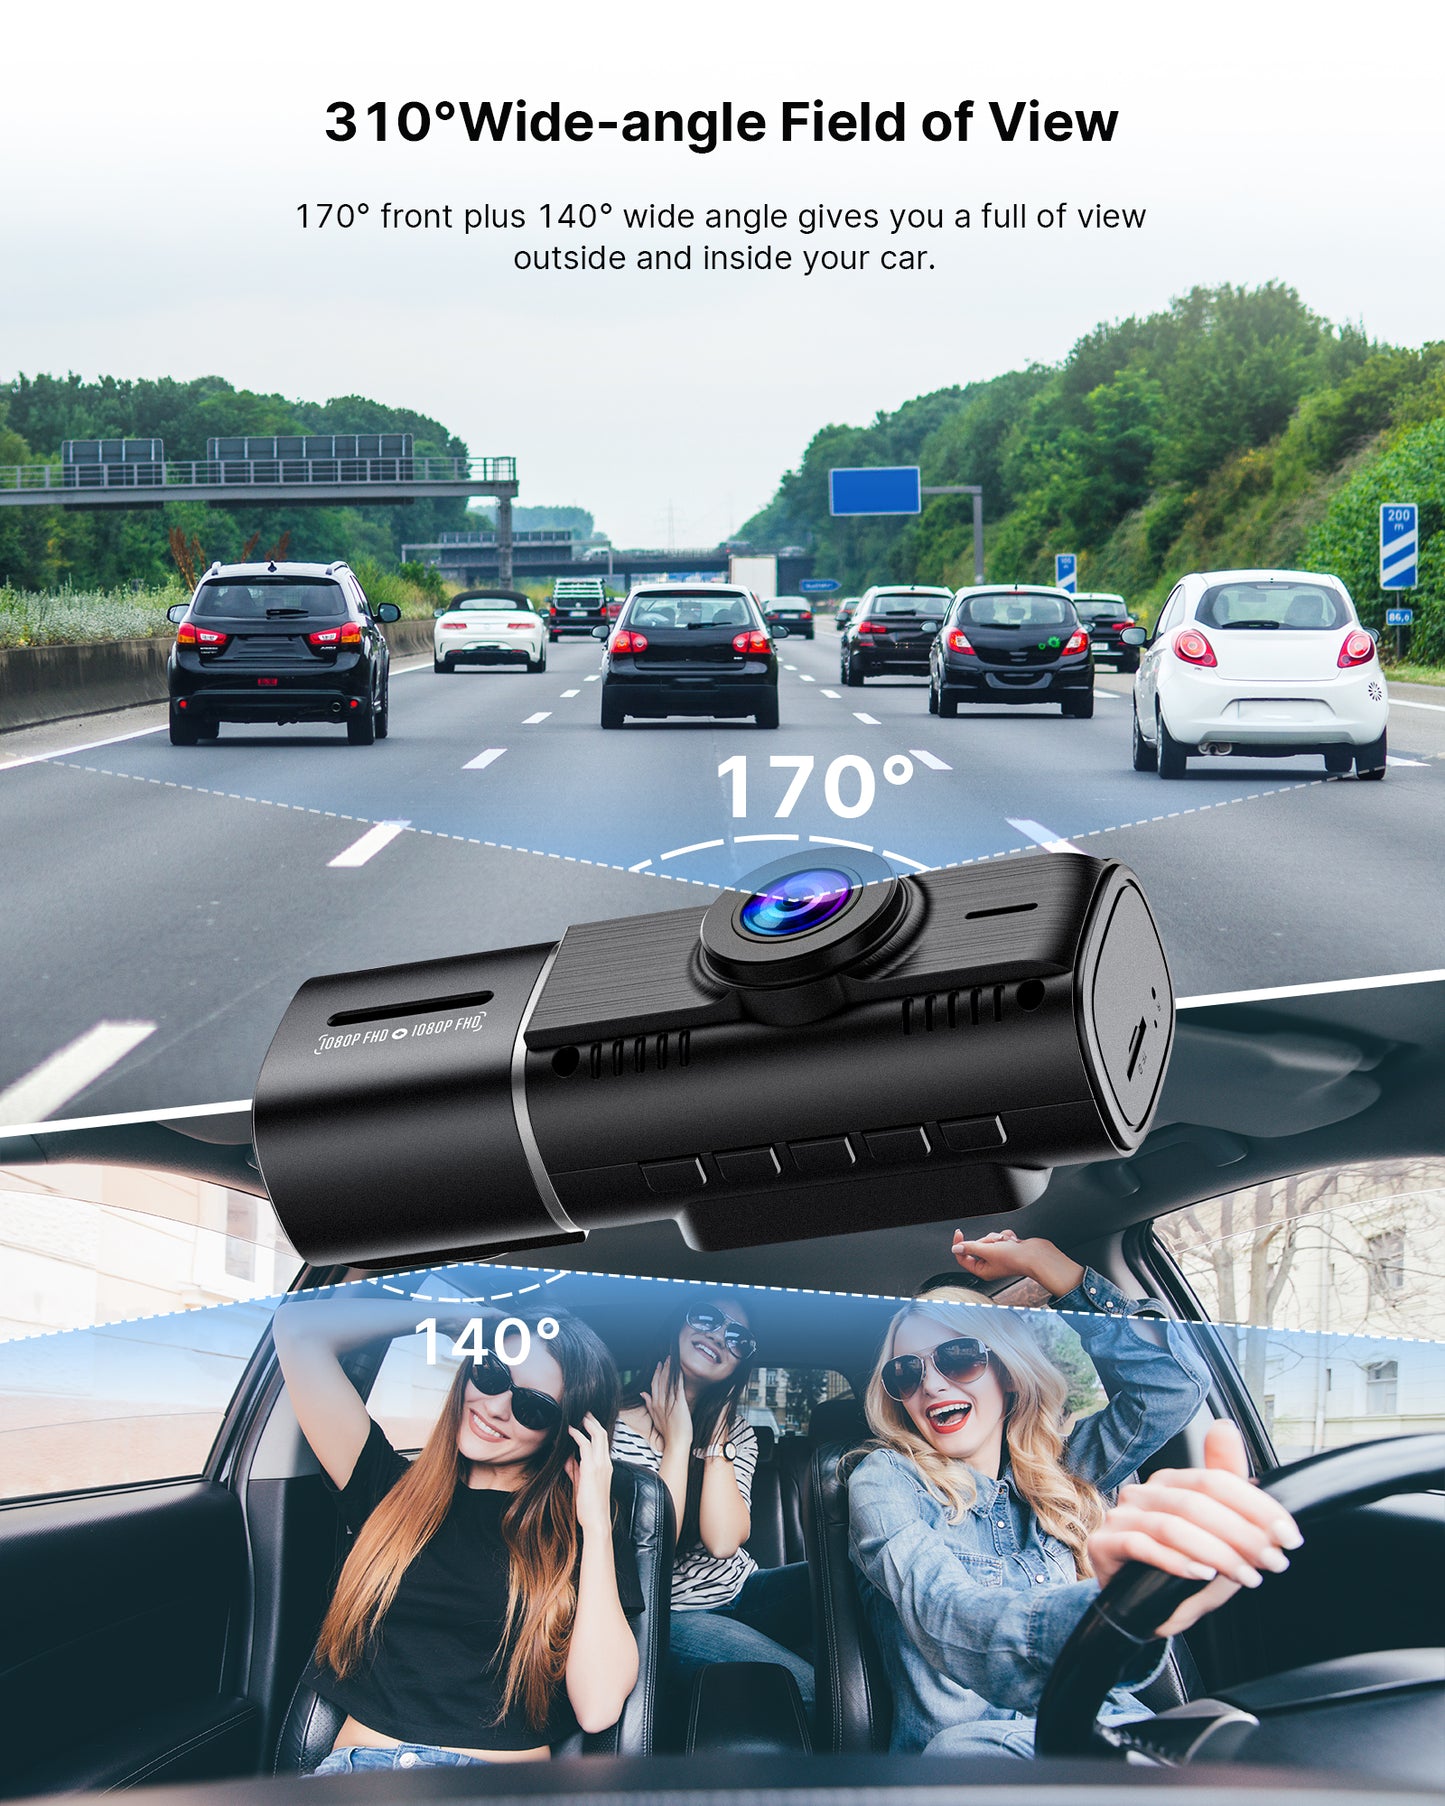 TOGUARD Dual FHD 1080P Dash Cam Front and Inside Car Camera with Night Vision WDR Car Dash Camera Black